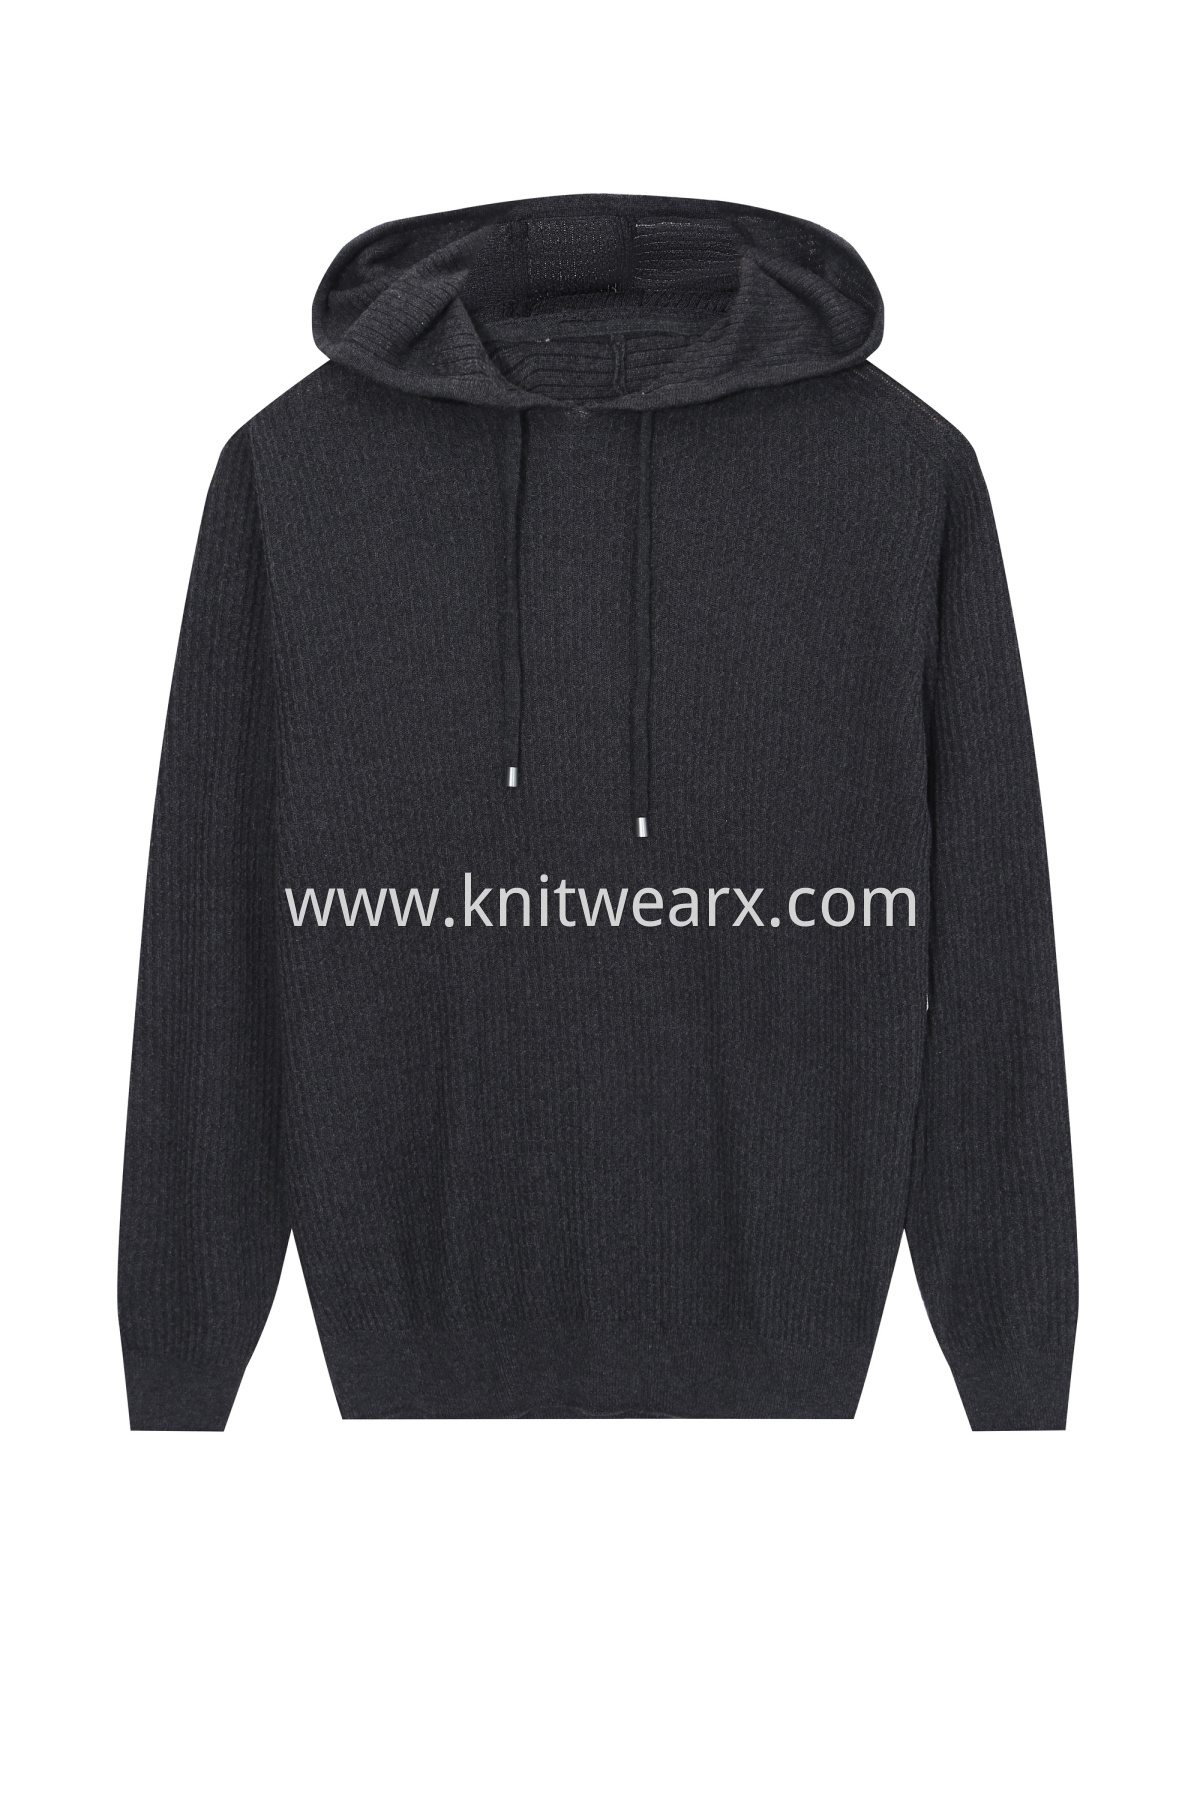 Men's Fashion Knitted Texture Hoodie Pullover